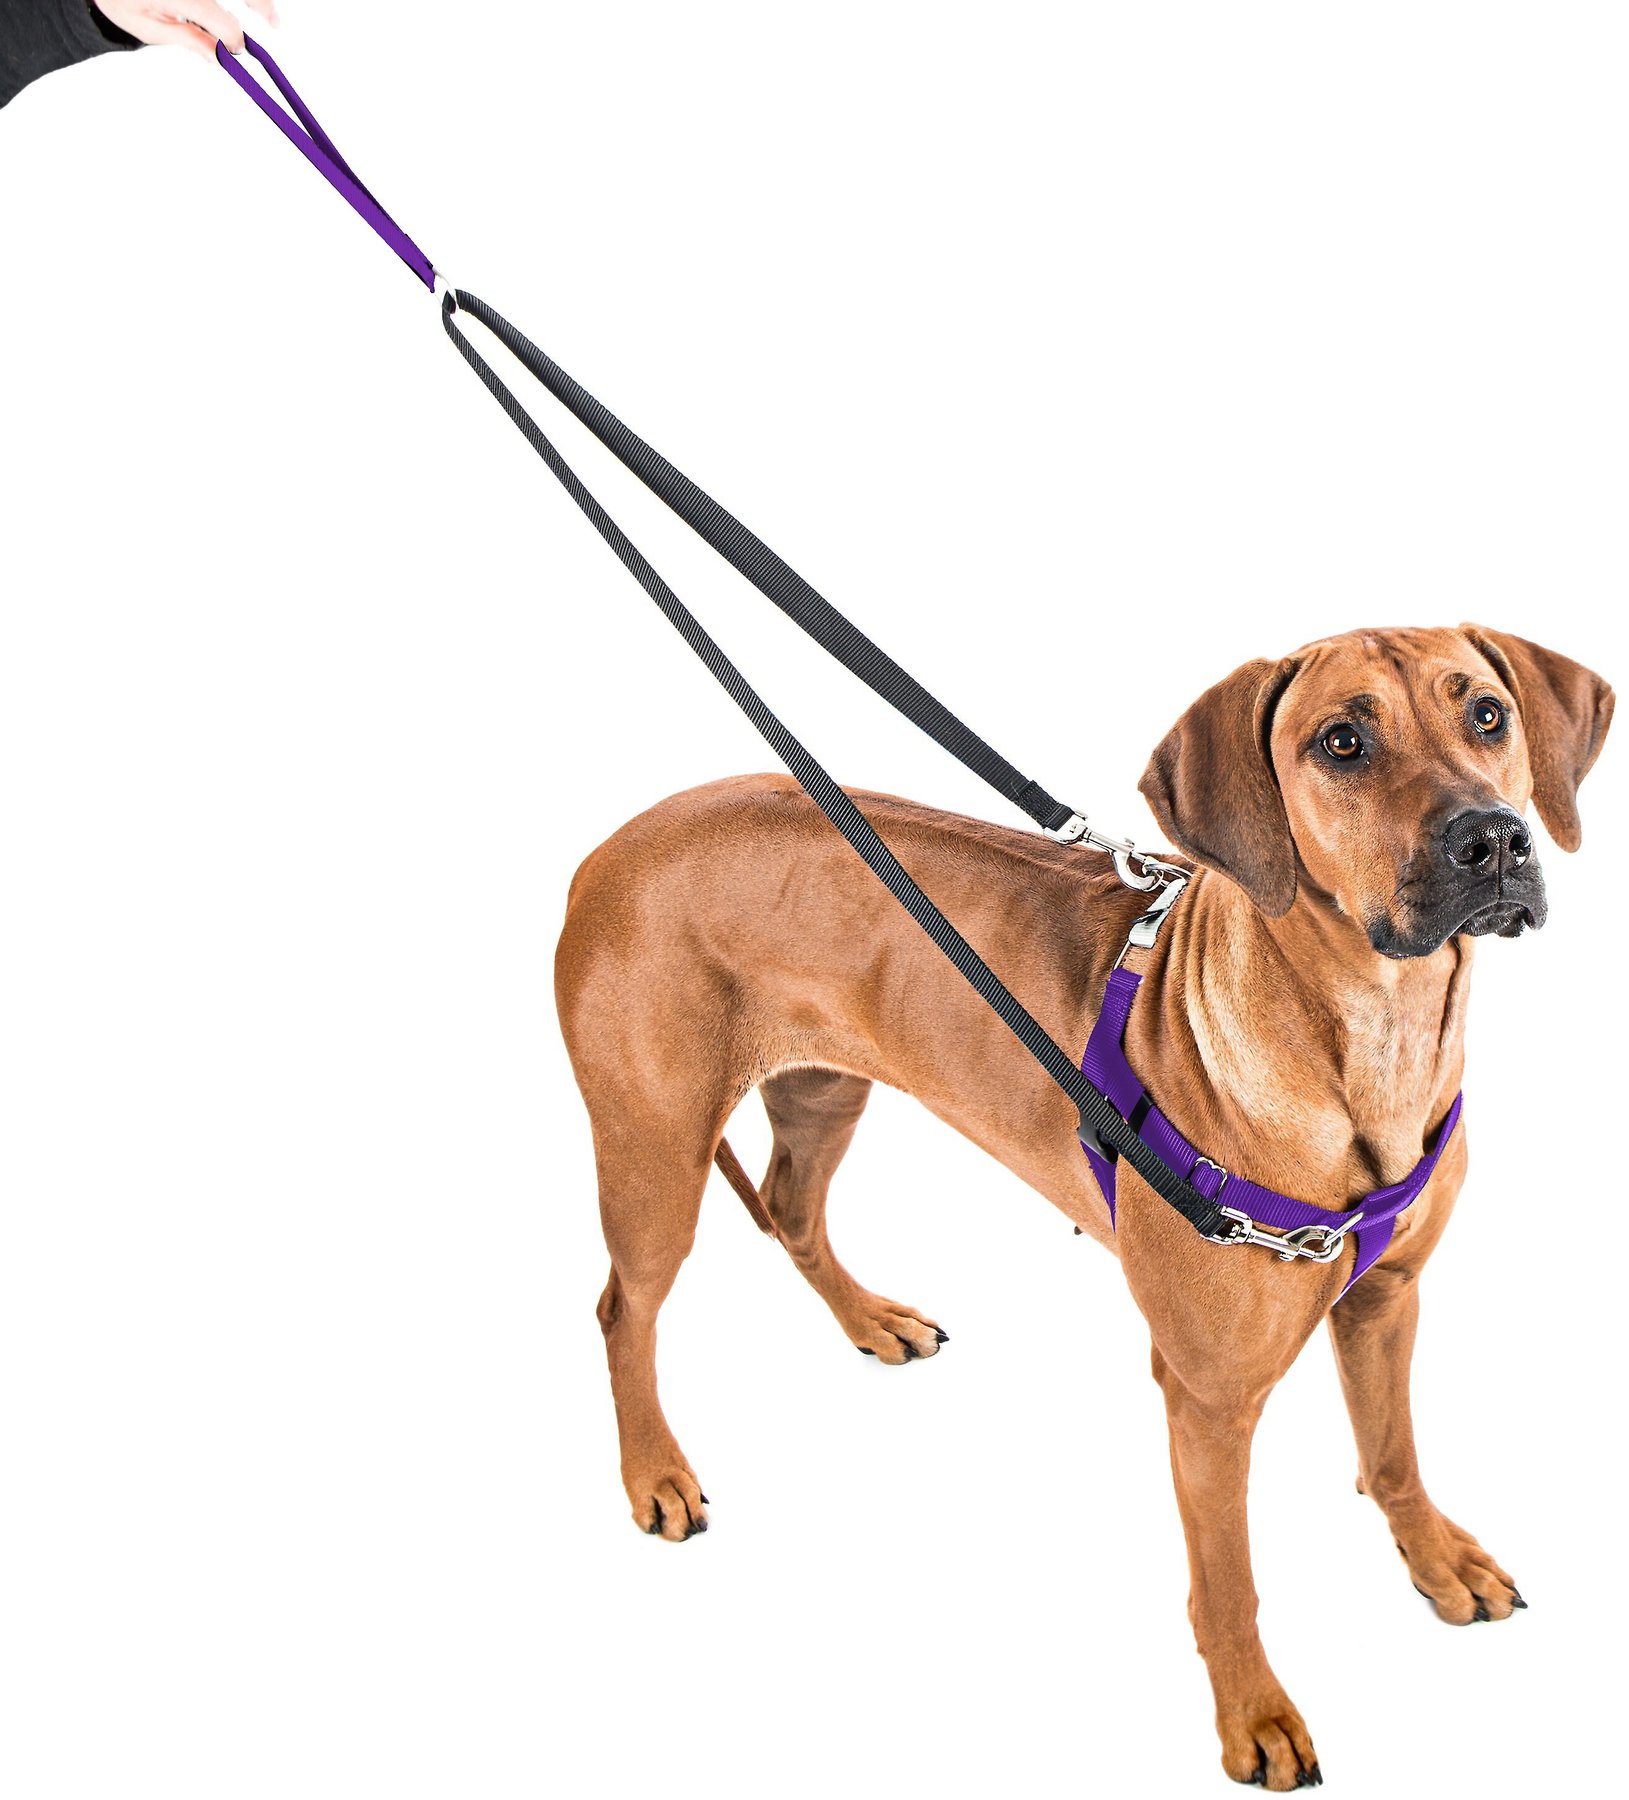 EarthStyle Designs 2 Hounds Design Freedom No Pull Dog Harness and Leash Adjustable Gentle Comfortable Control for Easy Dog Walking |for Small Medium and Large Dogs Made in USA